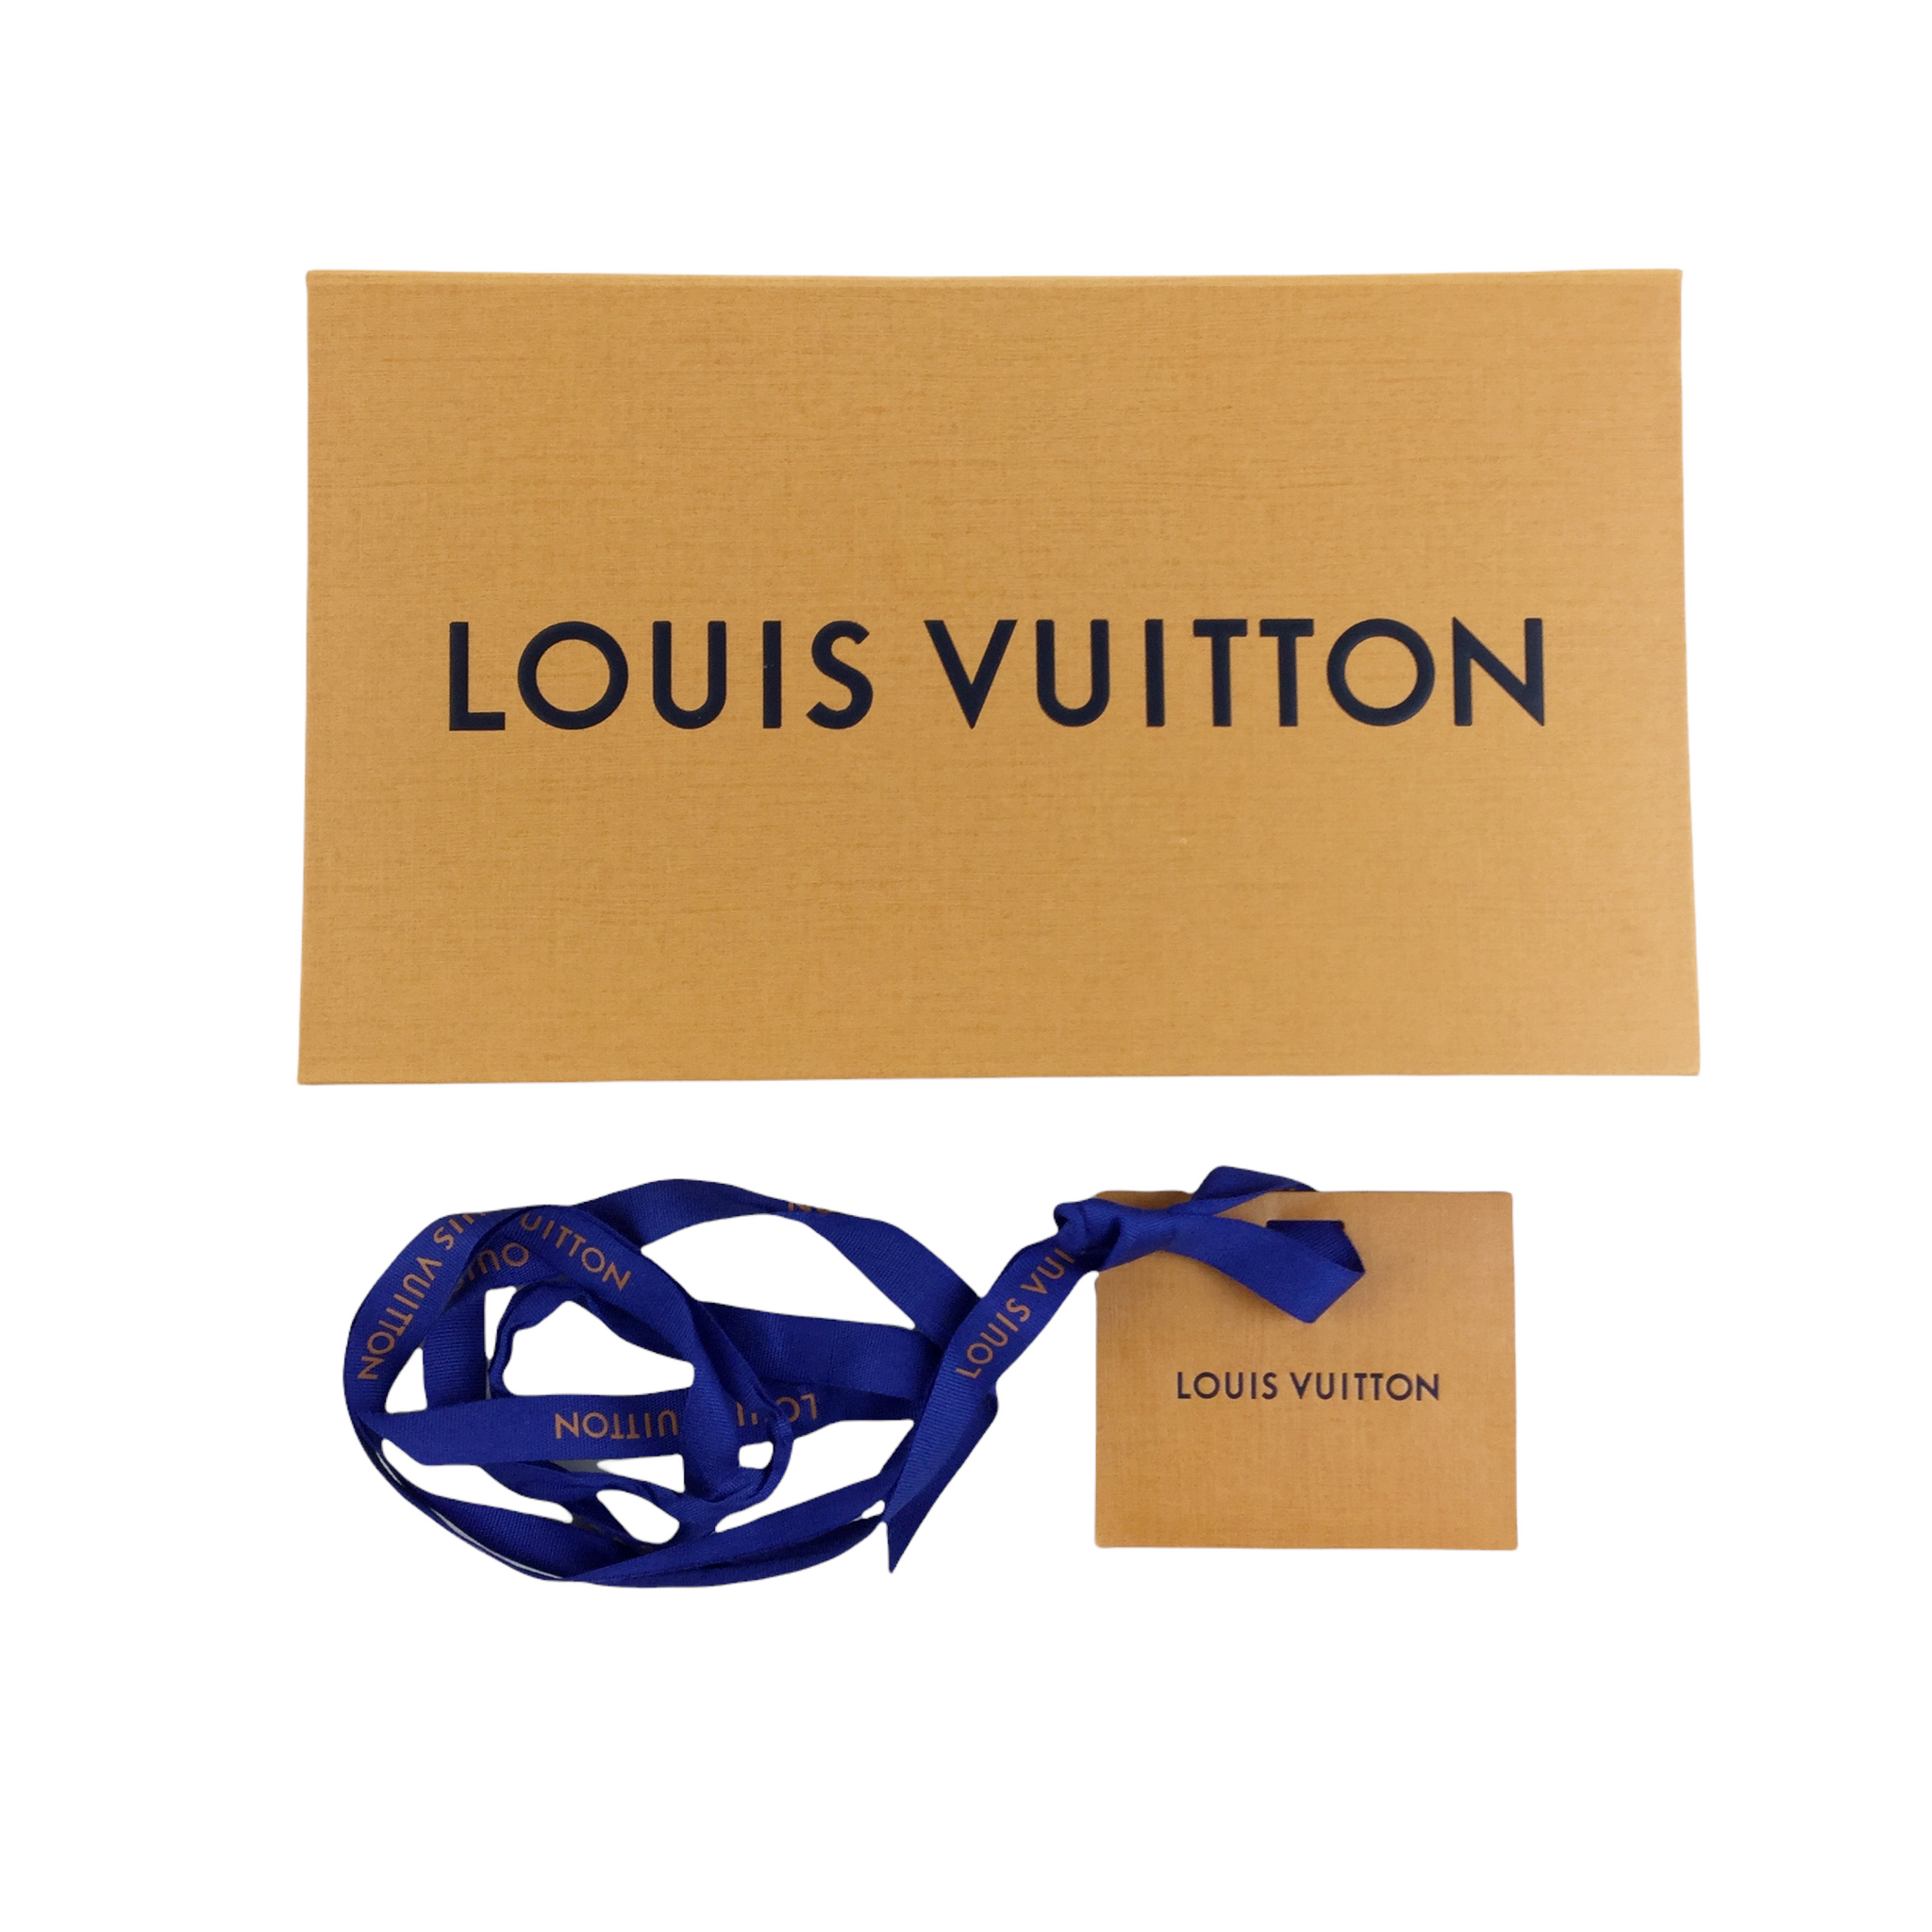 Authentic Louis Vuitton Gift Box  Accessory Box Empty Pull Out  65x525x175  eBay